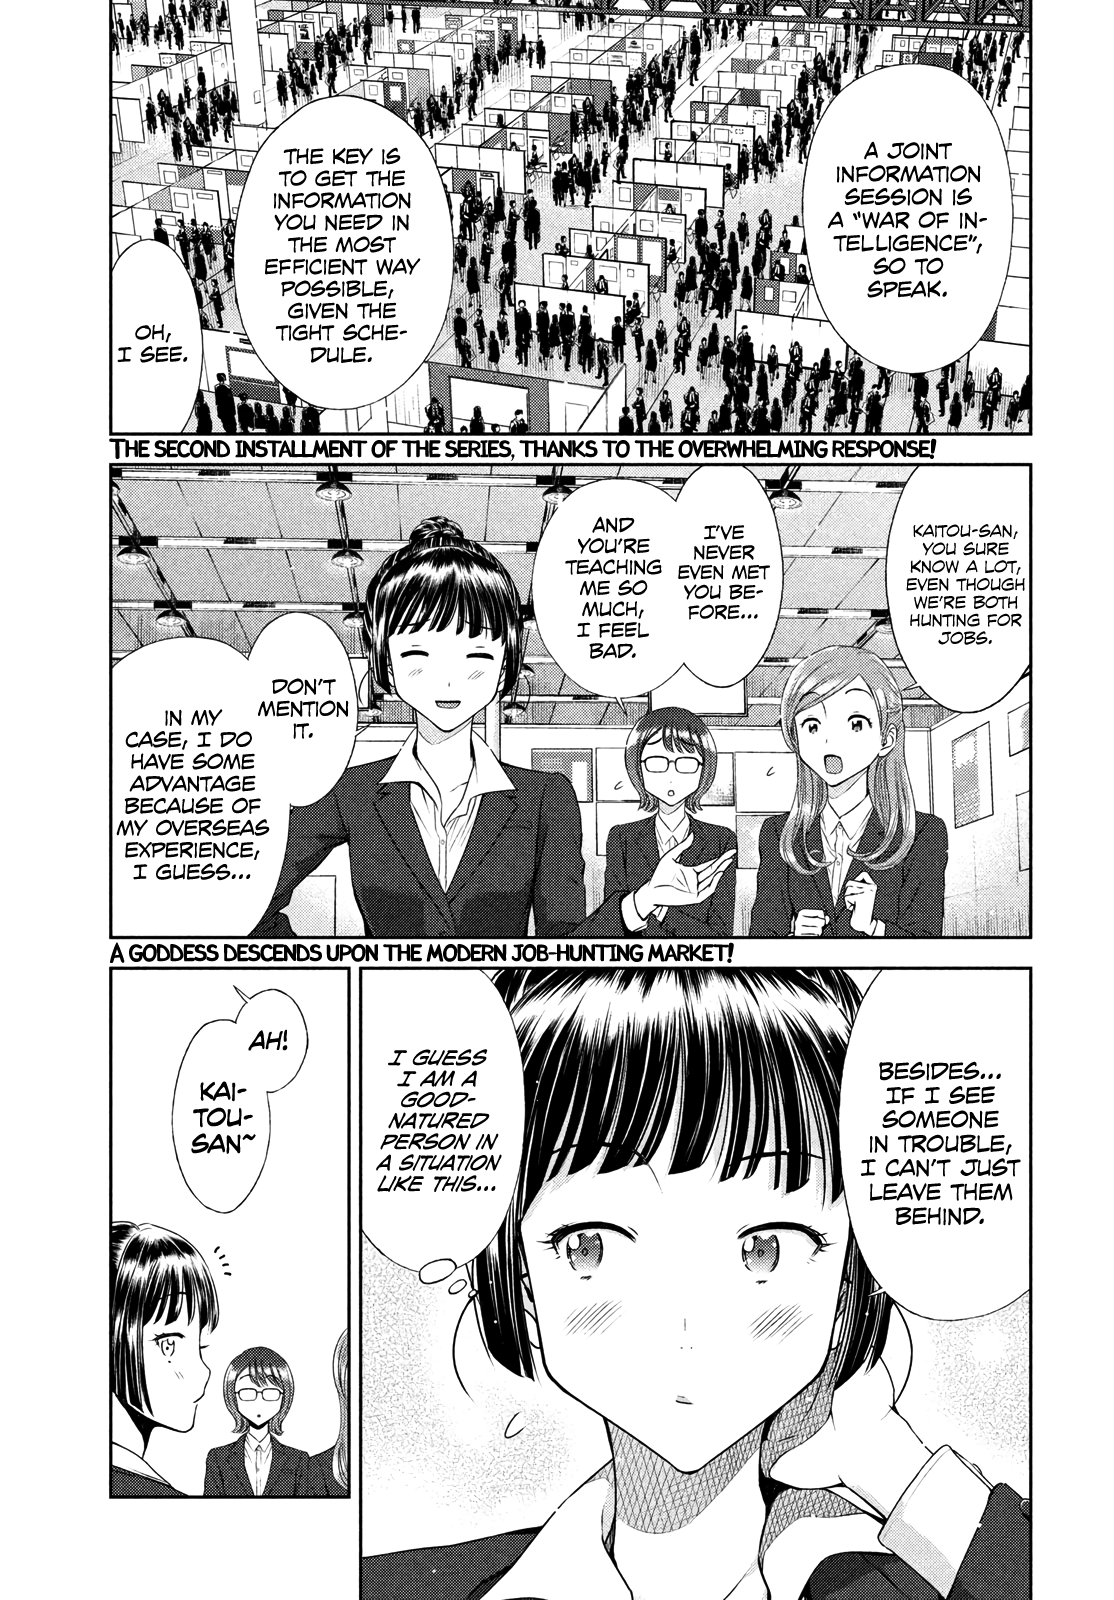 Ah! My Job-Hunting Goddess Vol.1 Chapter 3: The Third Company - Joint Information Session - Picture 2